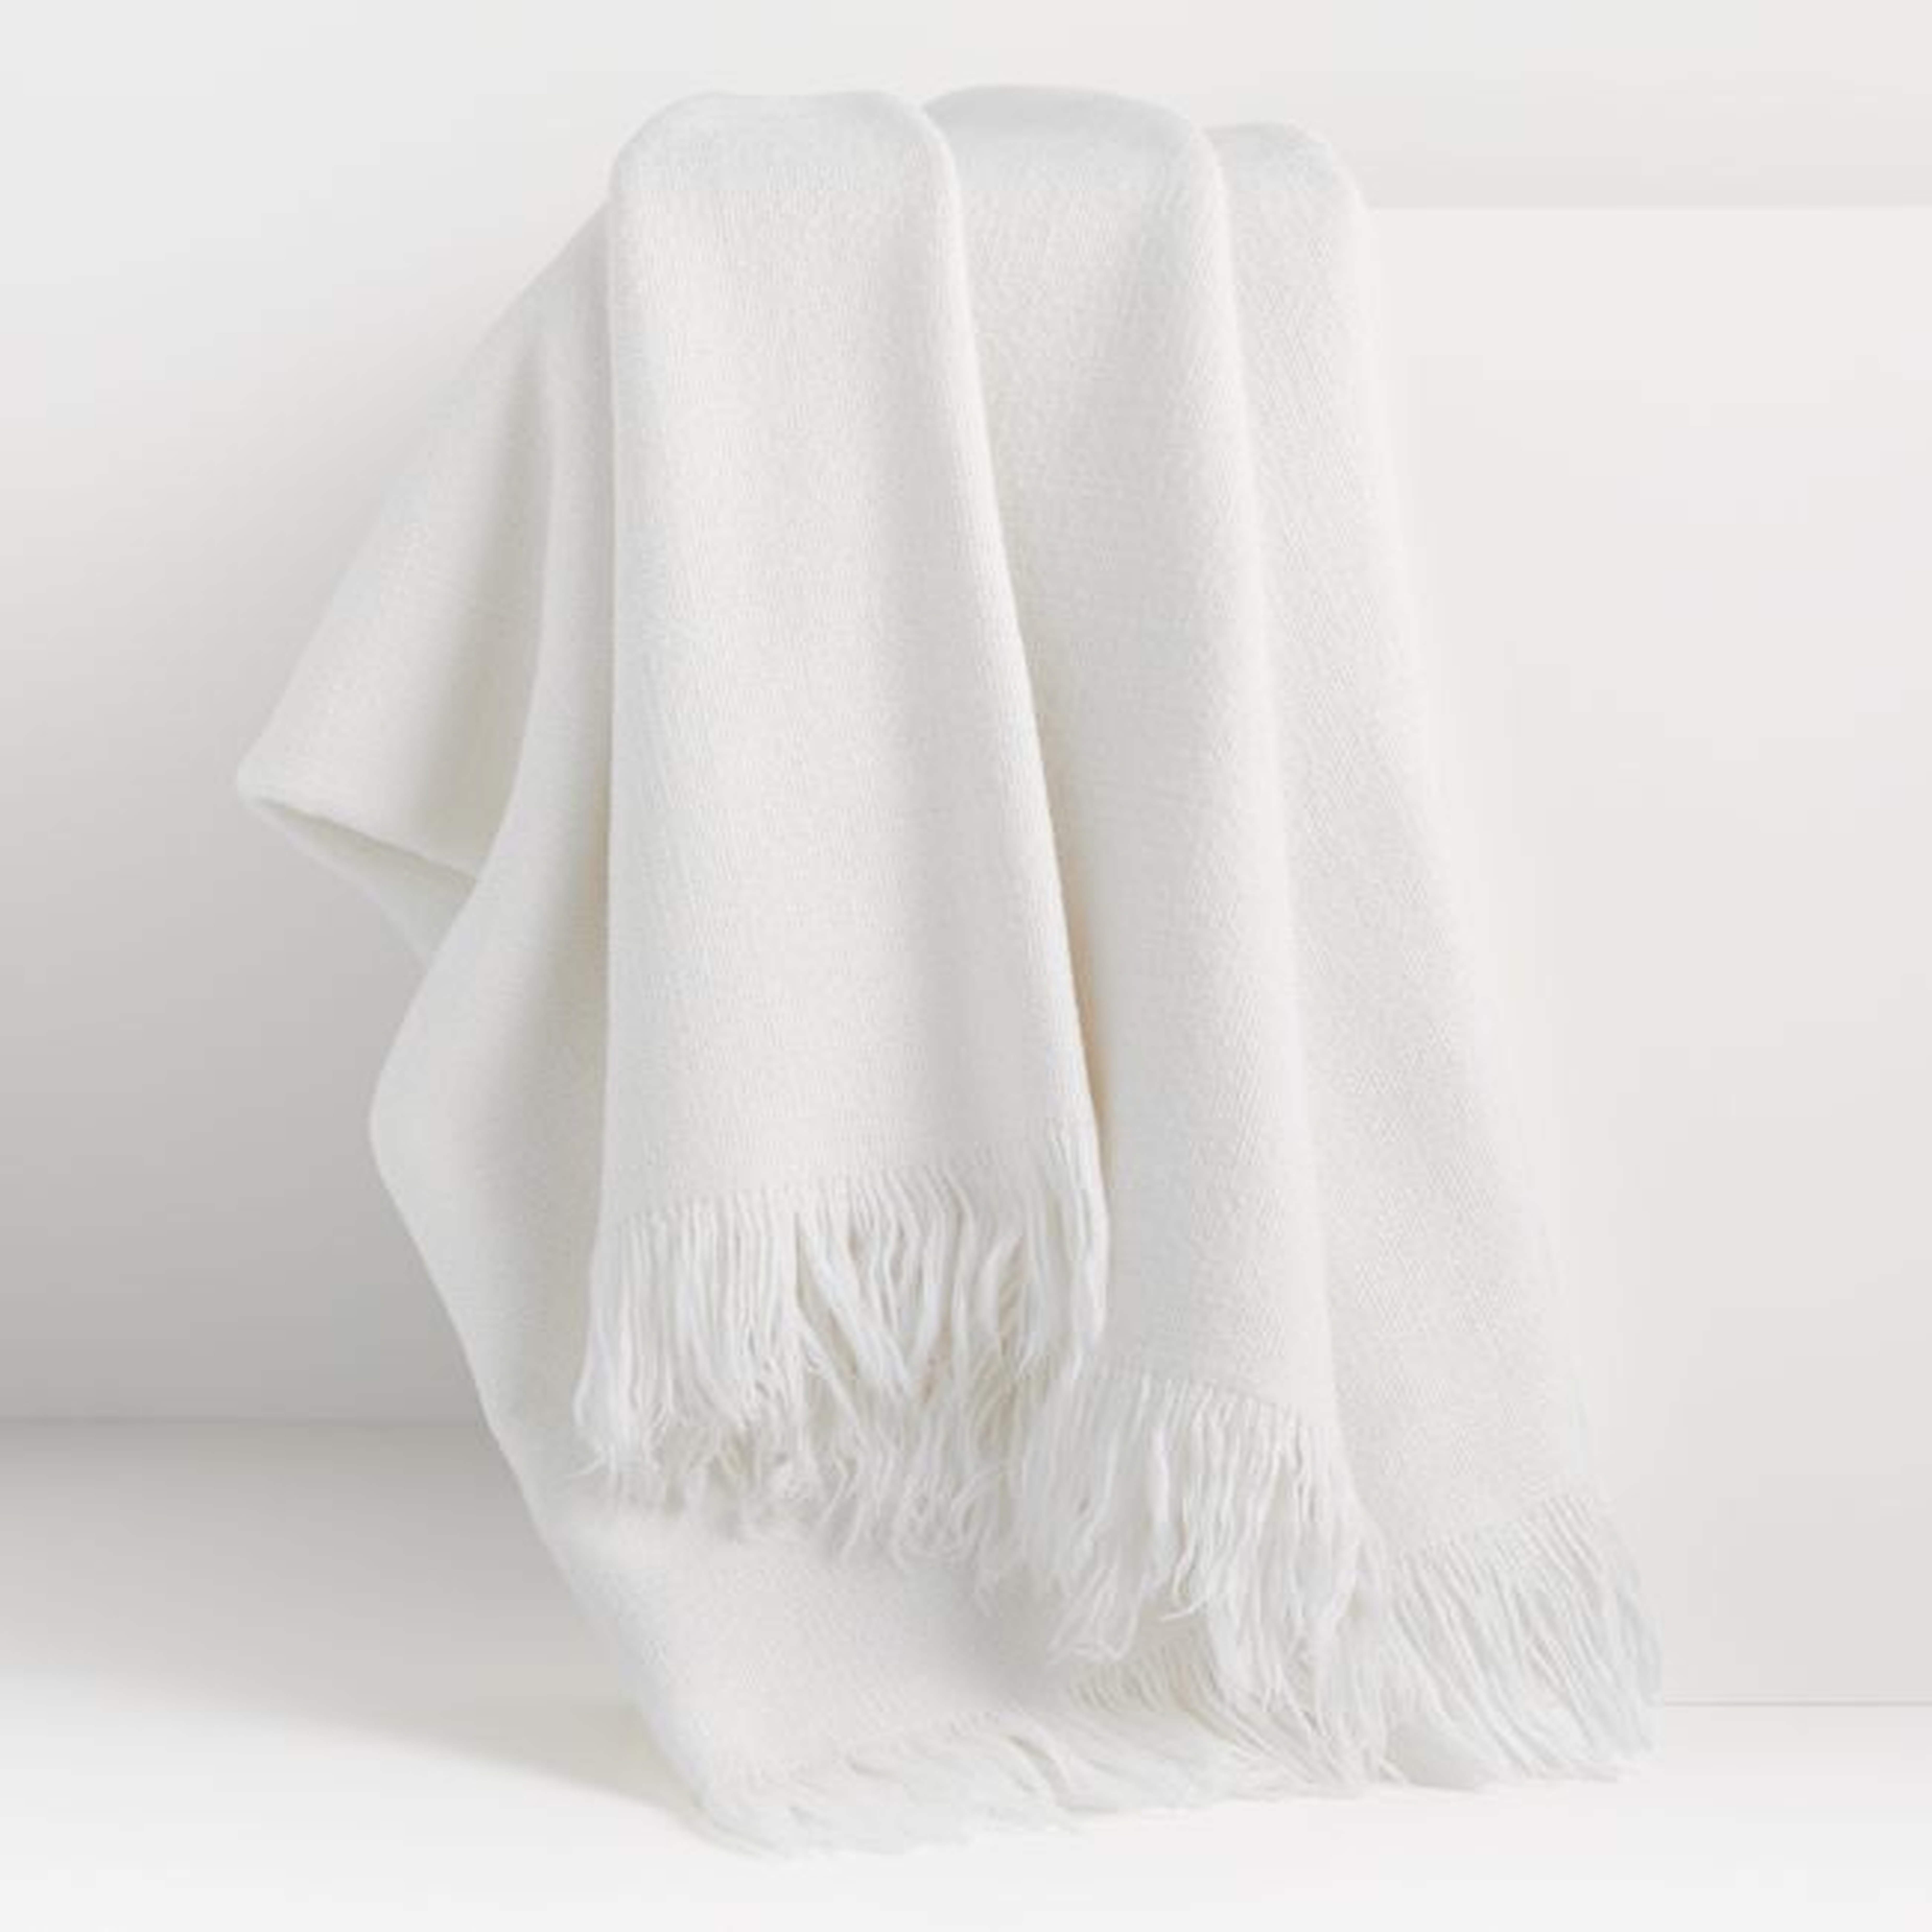 Plain Weave White Fringe 55x70 Throw - Crate and Barrel